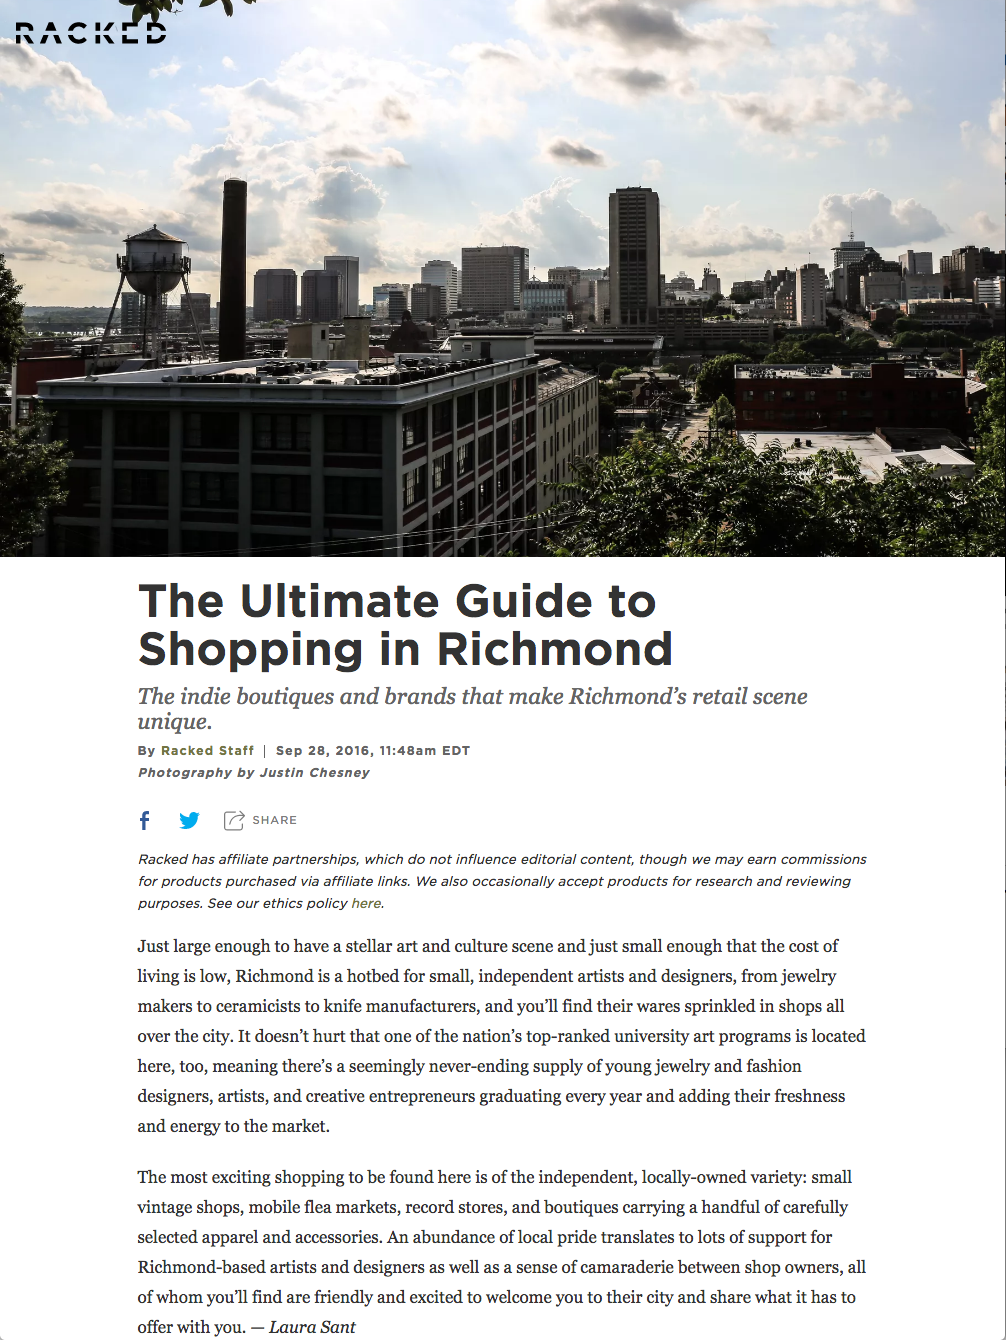 The_Ultimate_Guide_to_Shopping_in_Richmond_-_ RACKED SEPT 2016.png